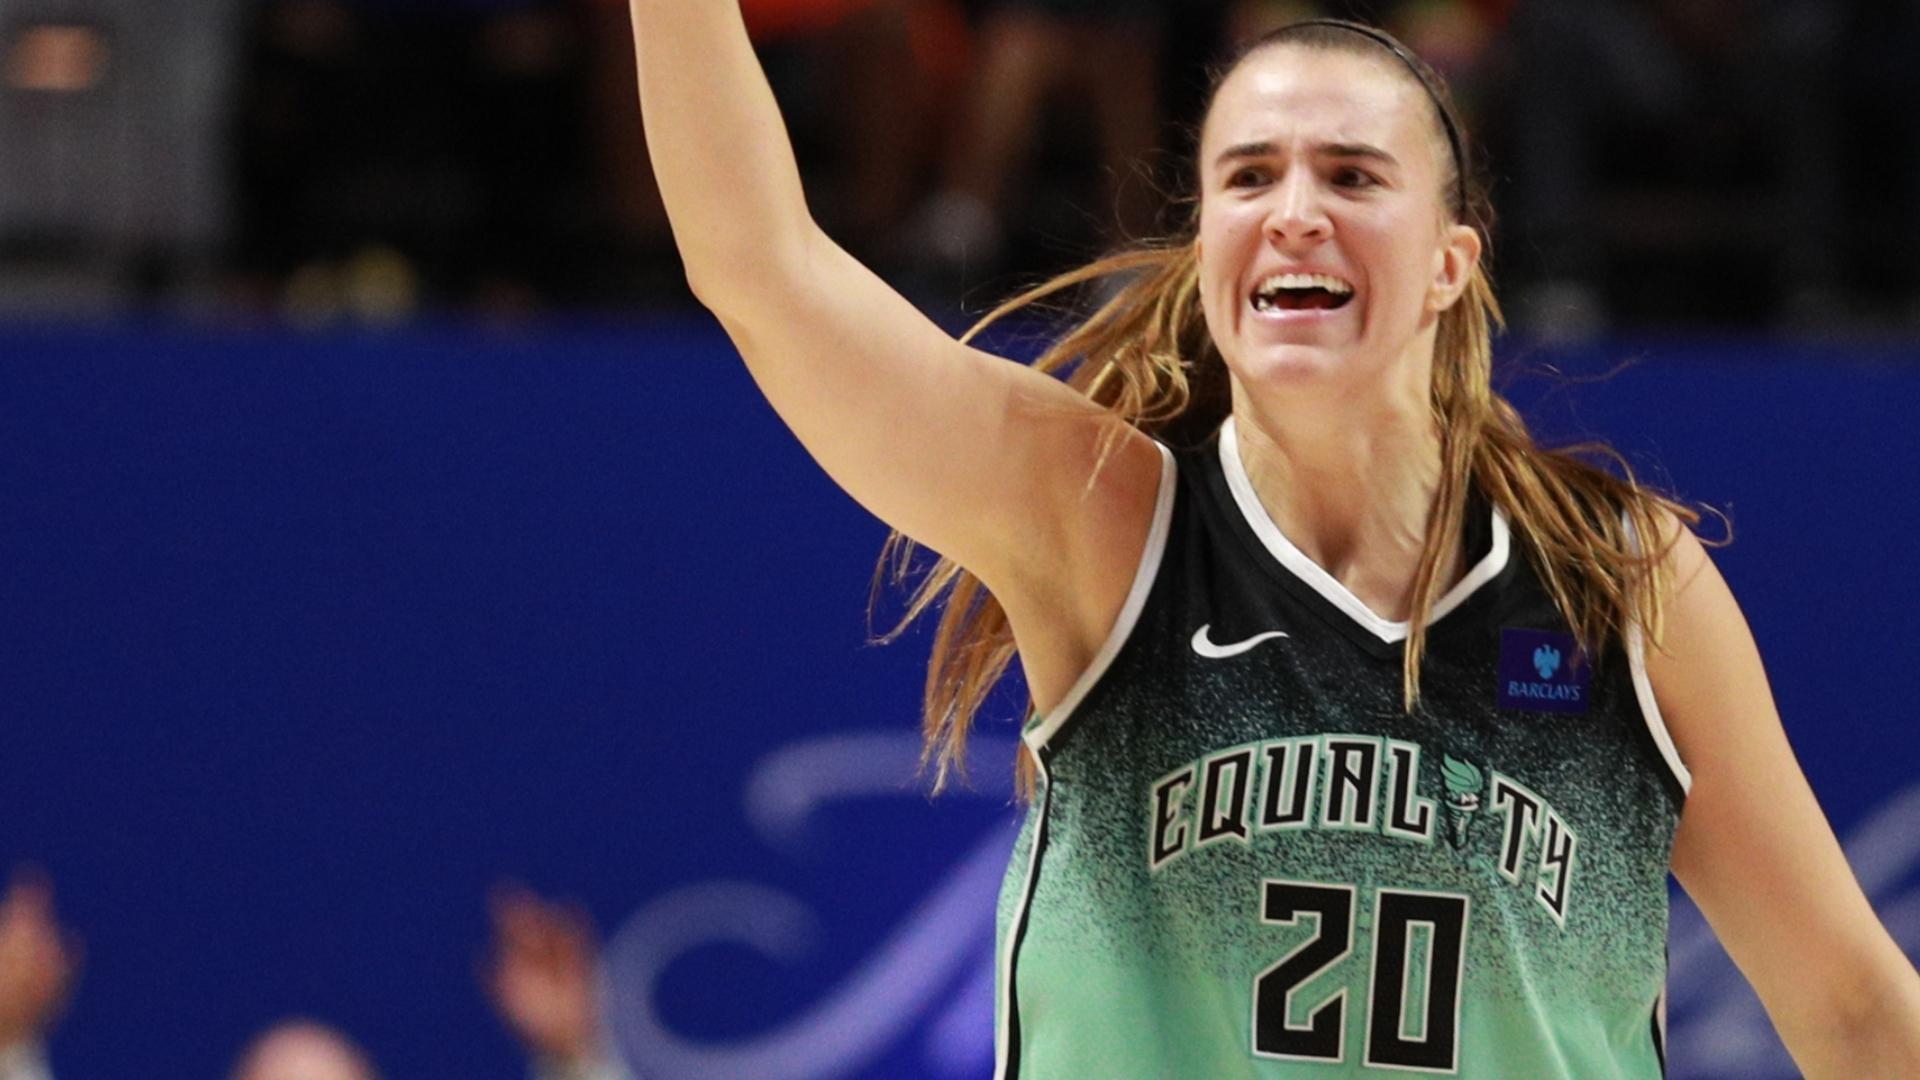 Sabrina Ionescu is hyped after clutch layup in final minute